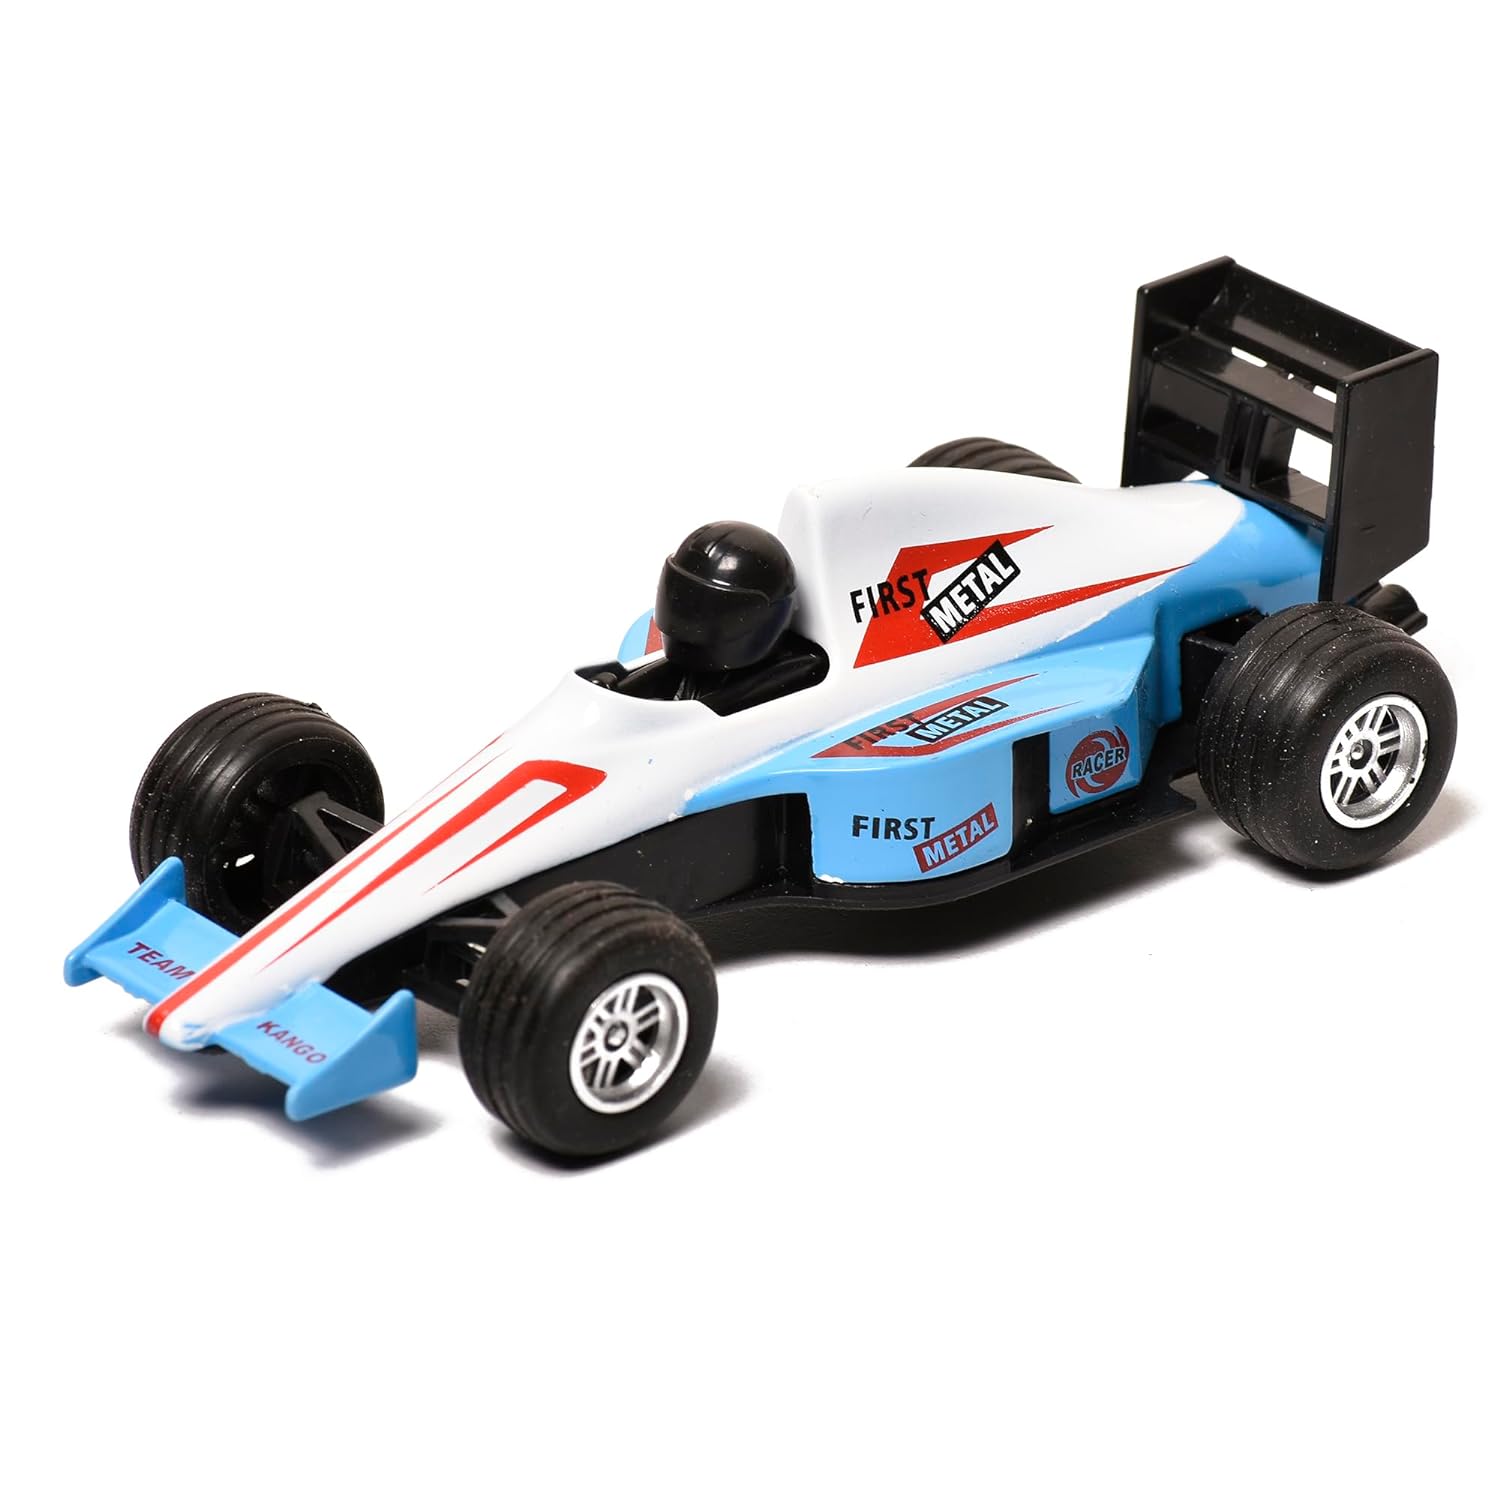 Braintastic Pullback Friction Simulation Model Small Size Racing Car Miniature Vehicle Toys for Kids Age 3 + (Blue)